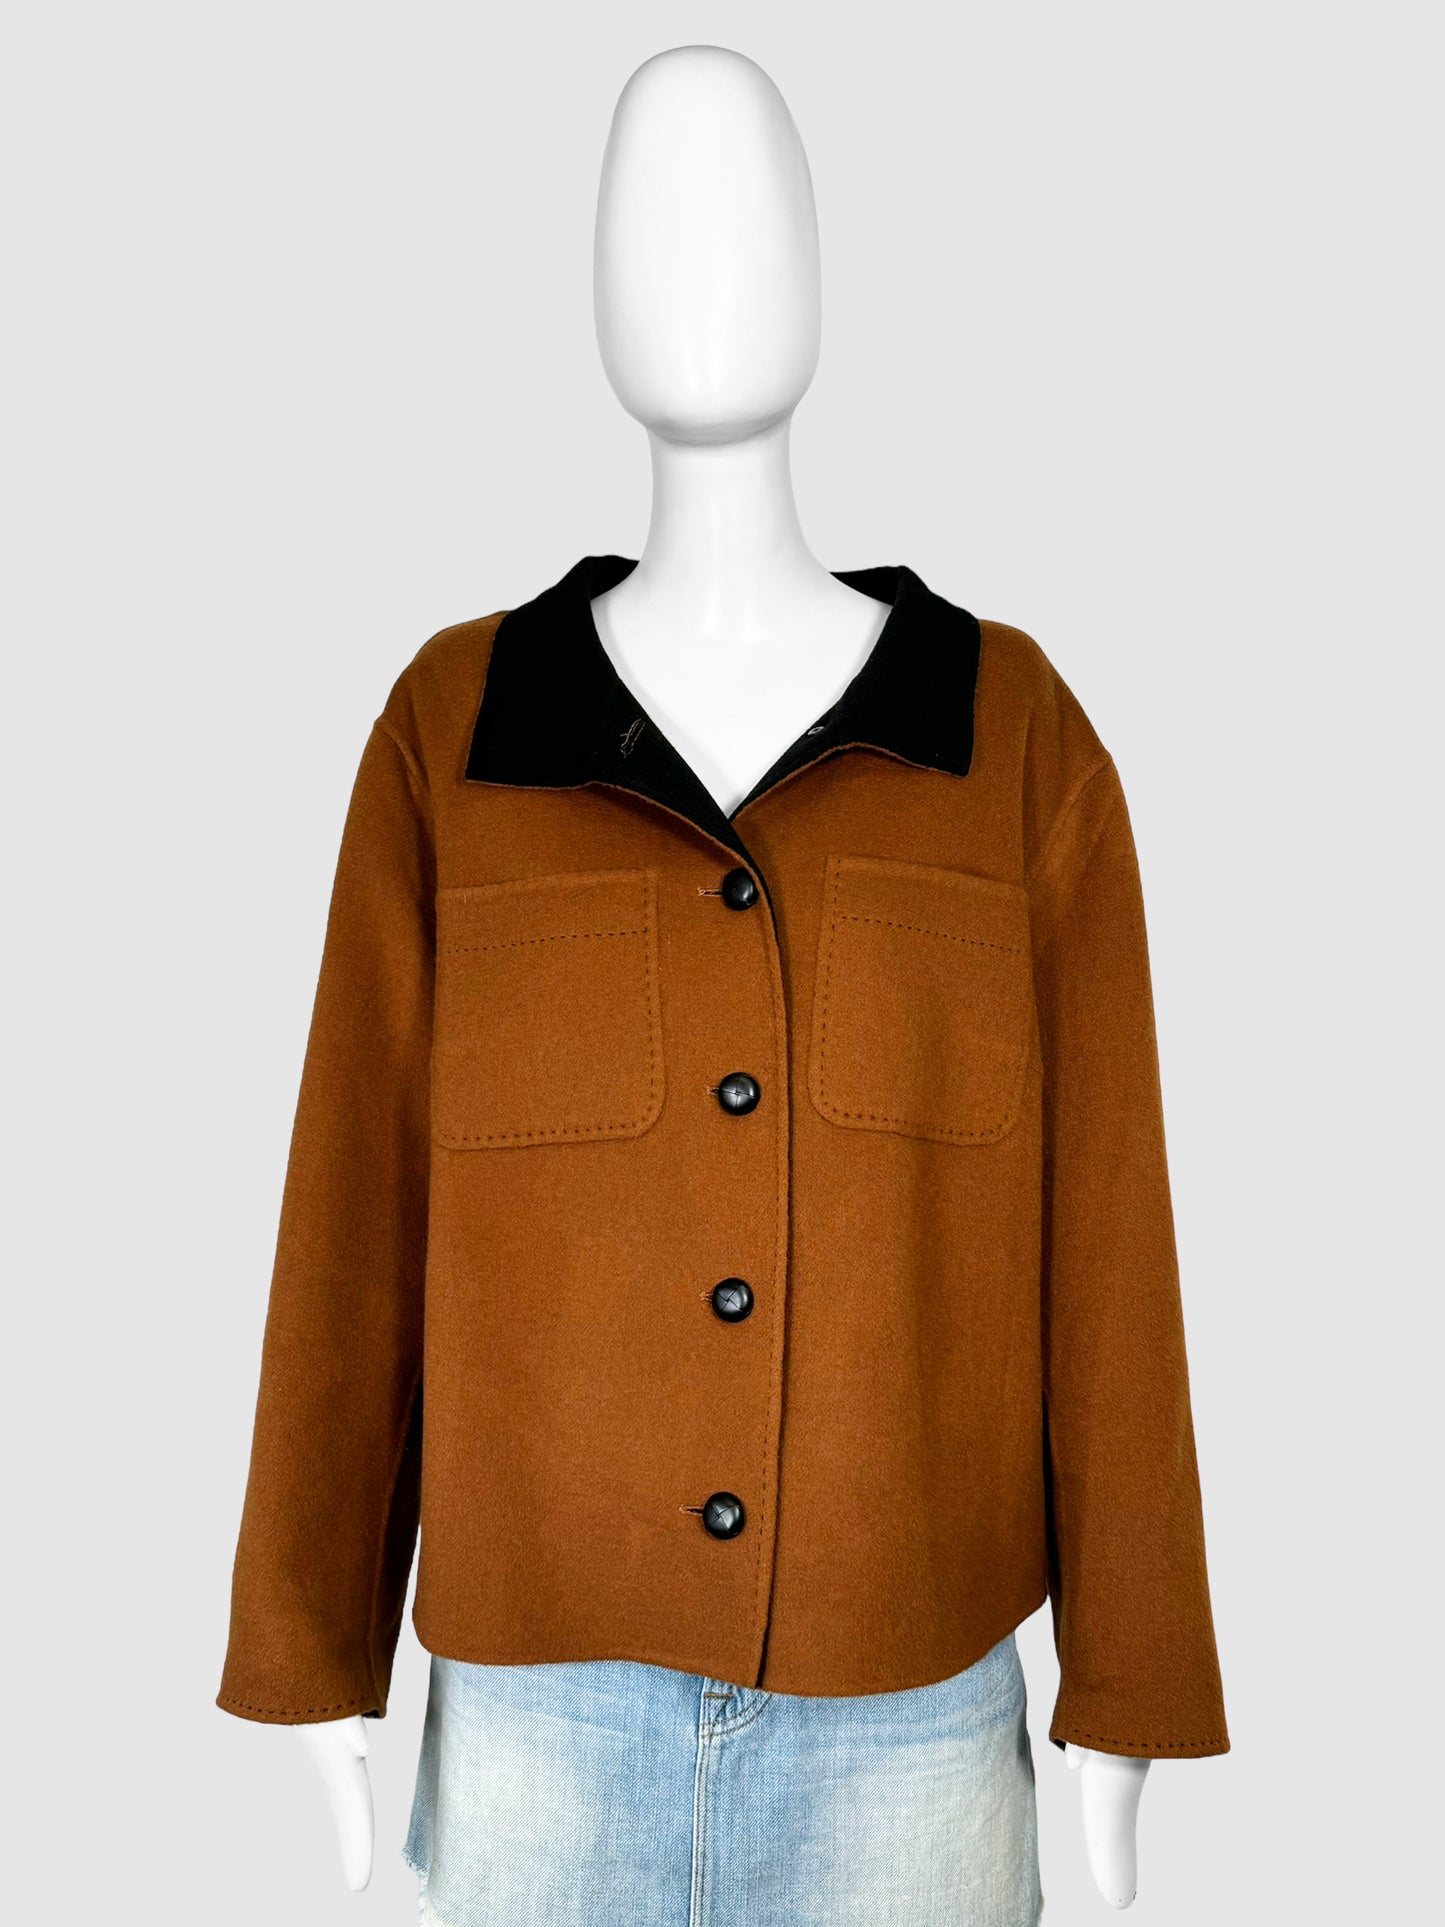 Button-Up Jacket - Size 2X